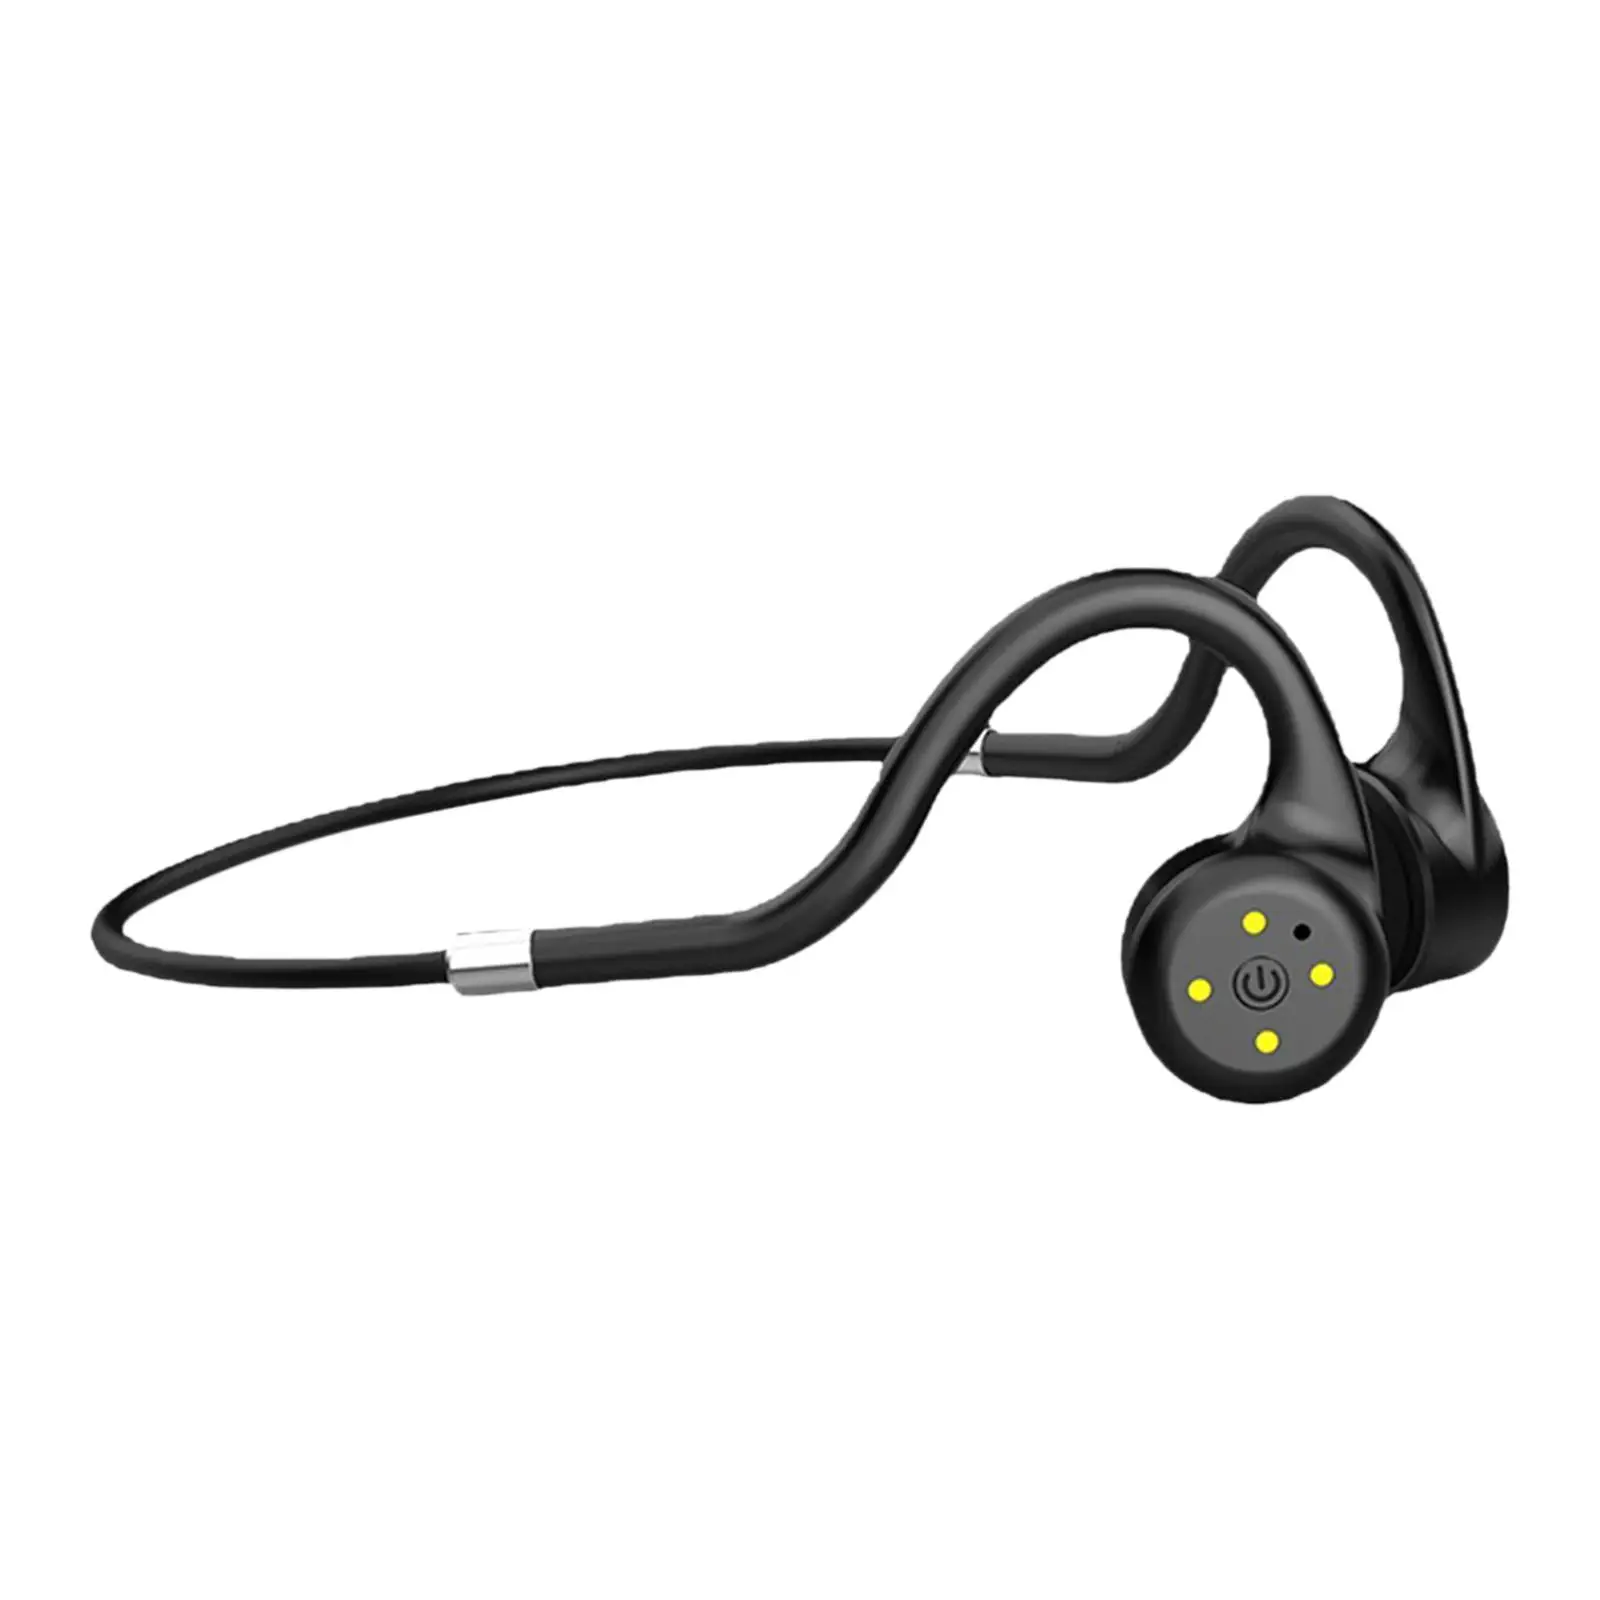  Conduction Swimming Headphones 150mAh 8GB IPX8 er Bendable for Driving Cycling  Jogging  Indoor